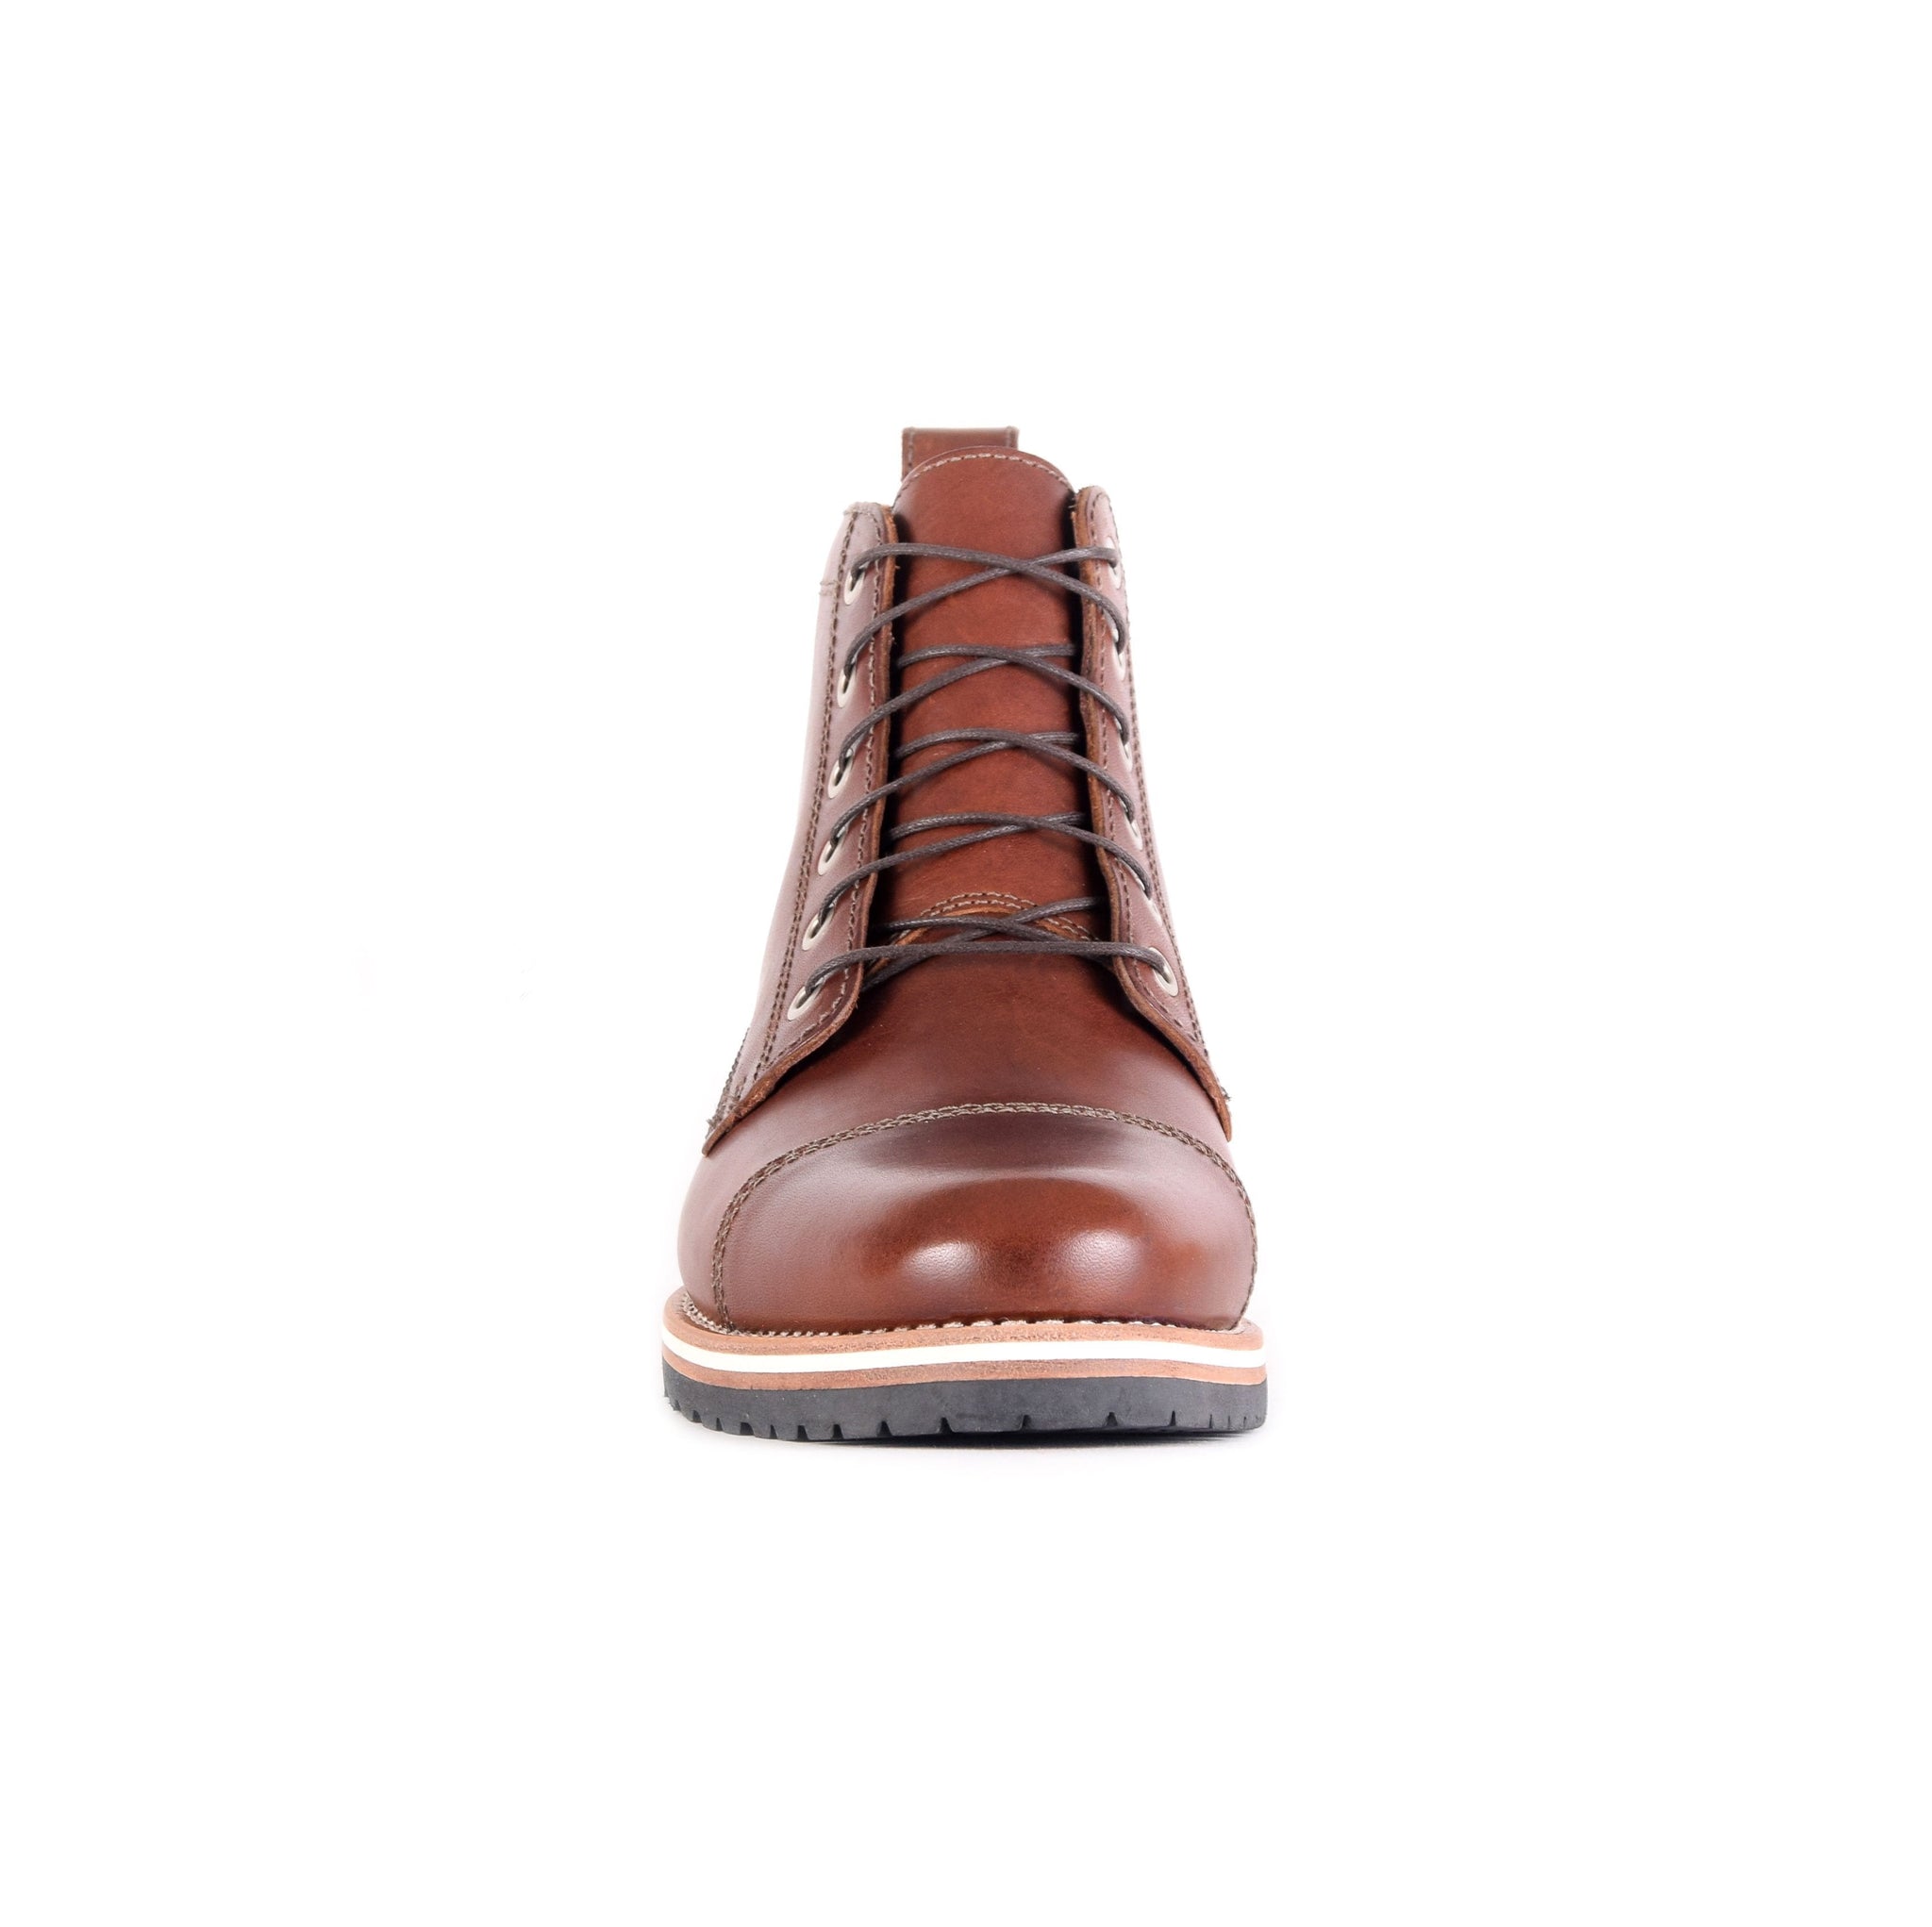 The Hollis Brown by HELM Boots